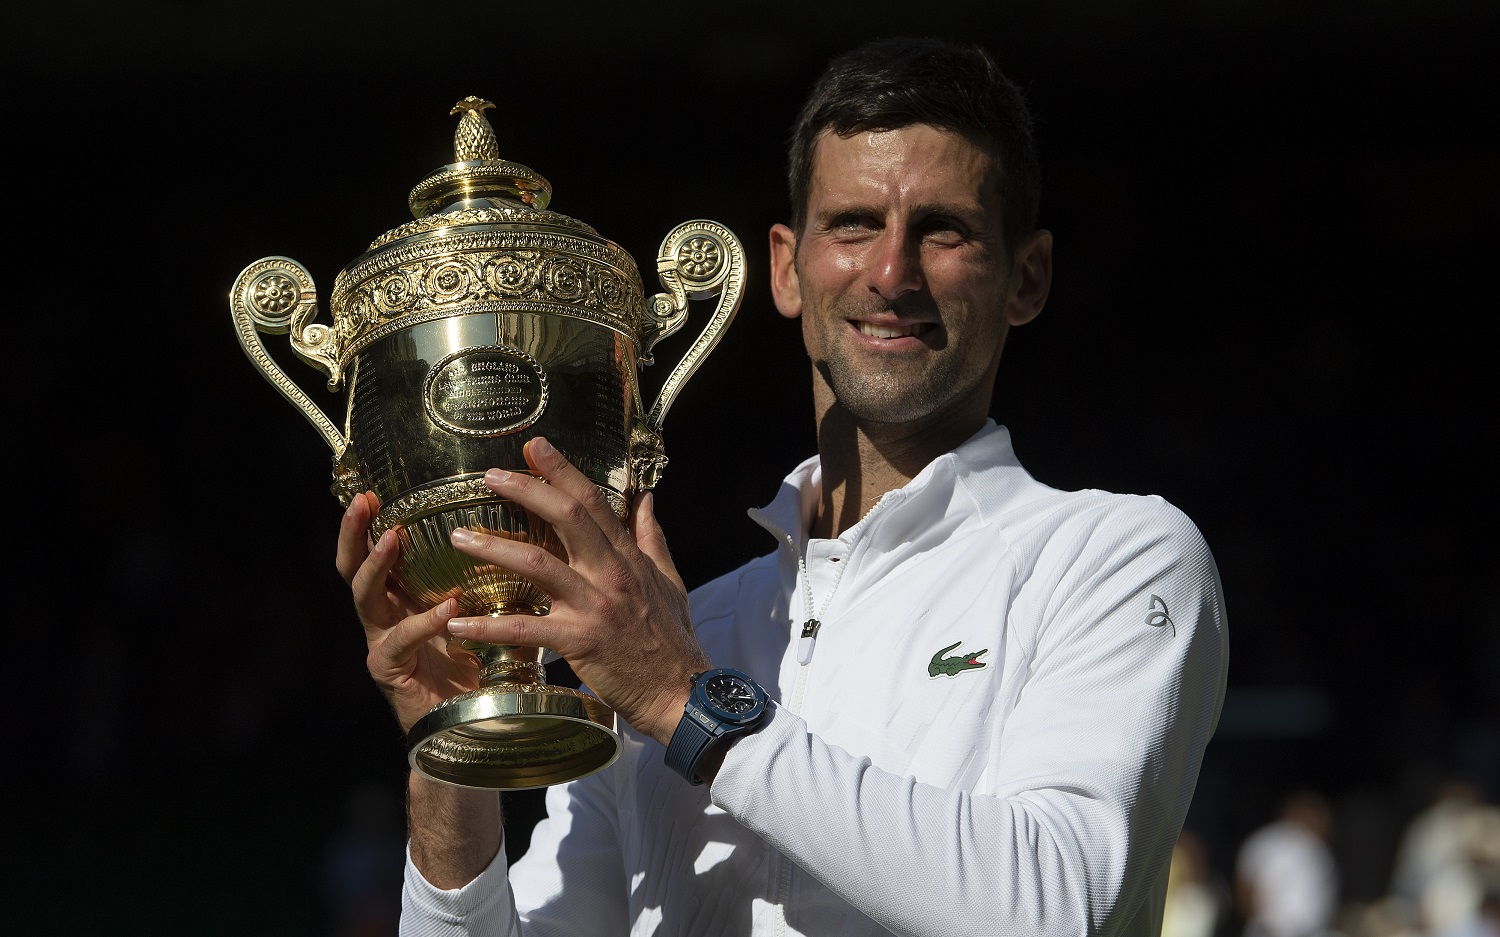 Wimbledon Champ Declares Himself a Healthy Scratch for the U.S. Open